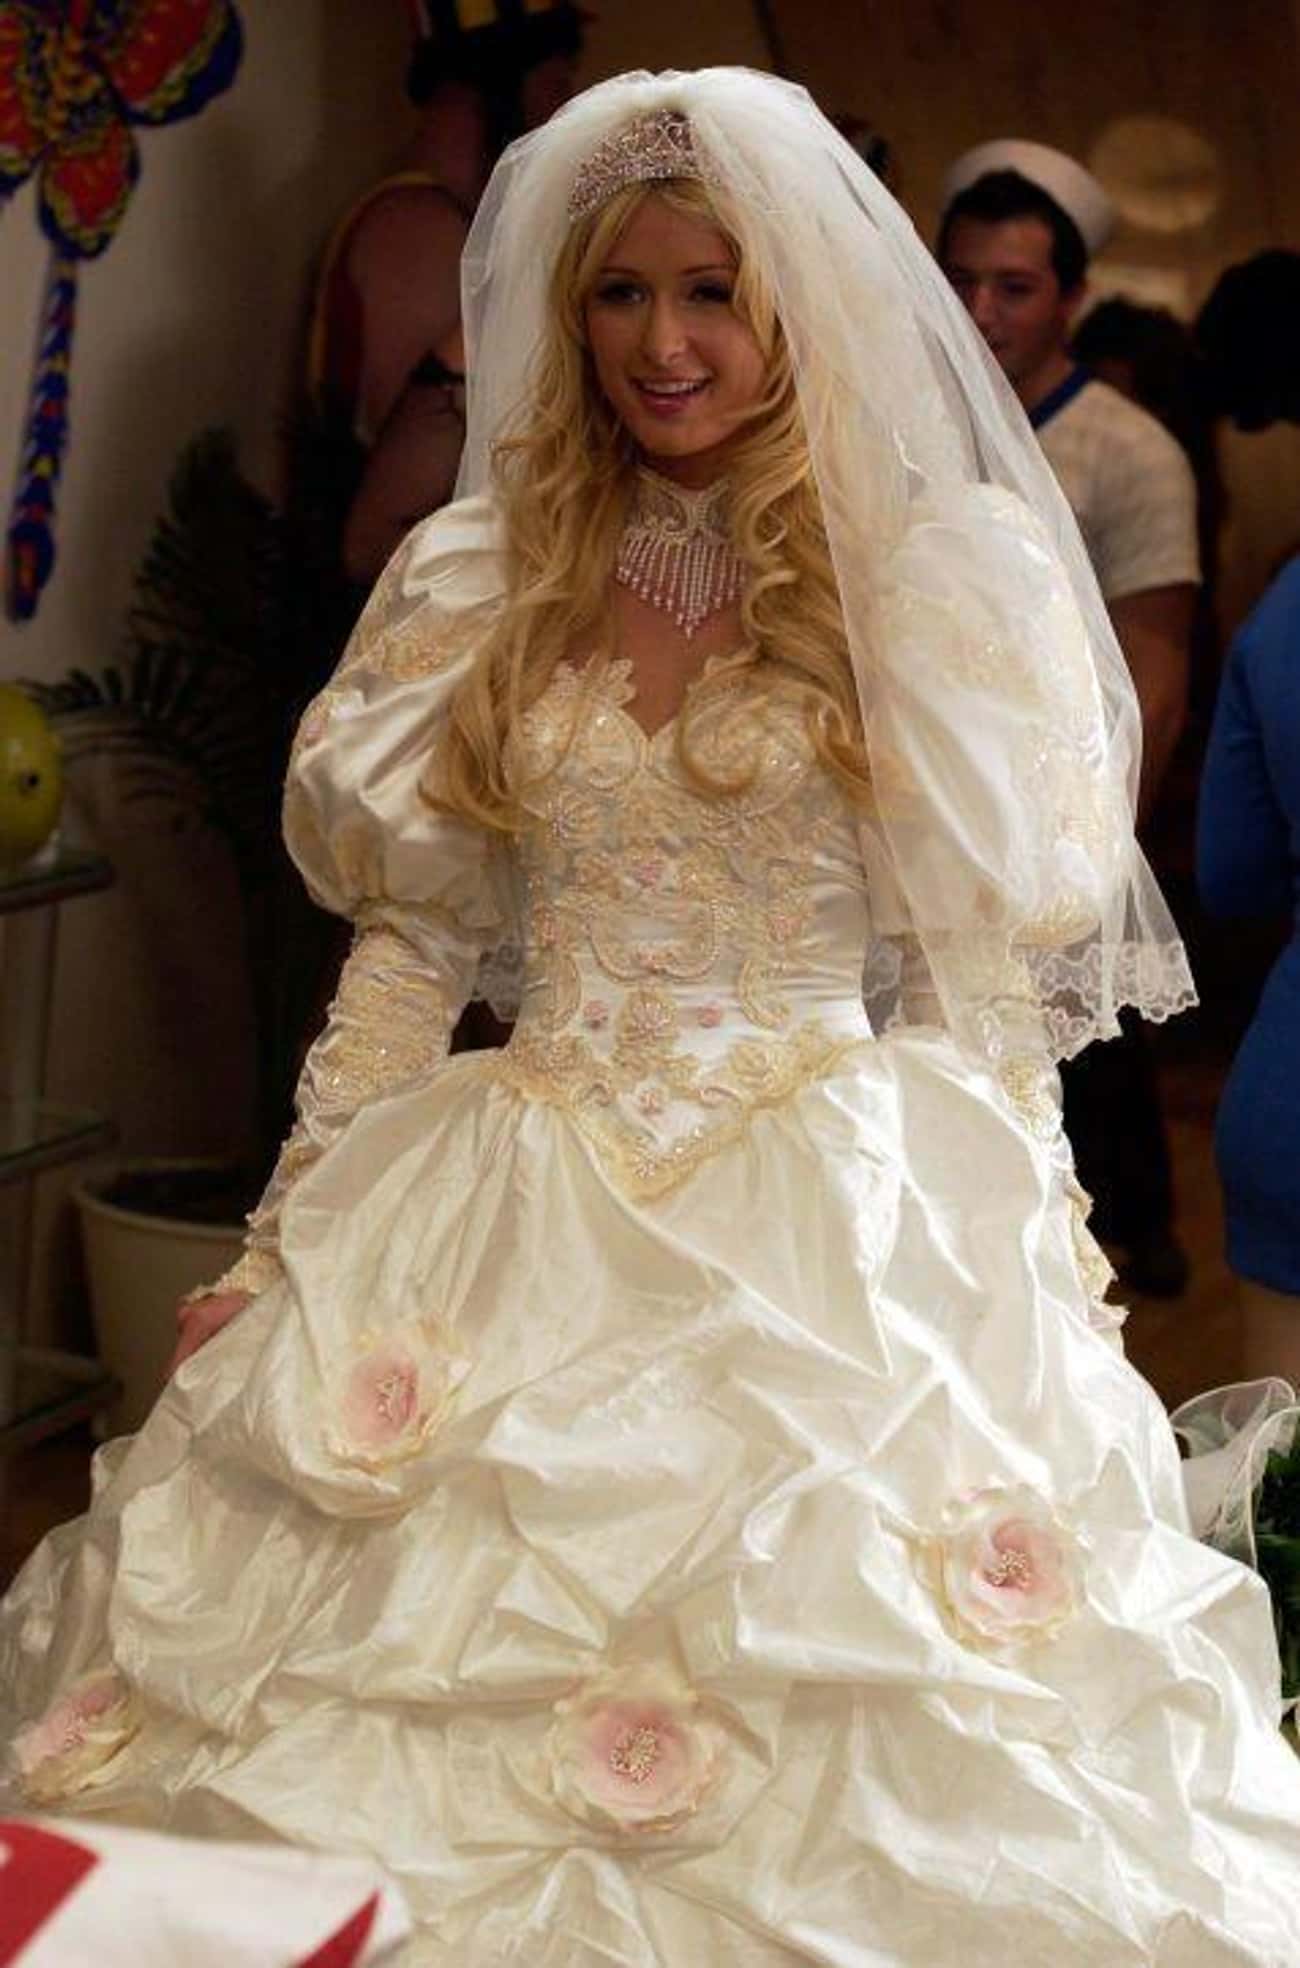 9 disaster wedding dresses on screen: Sex And The City fashion icon has a country time like this too!  - Photo 4.